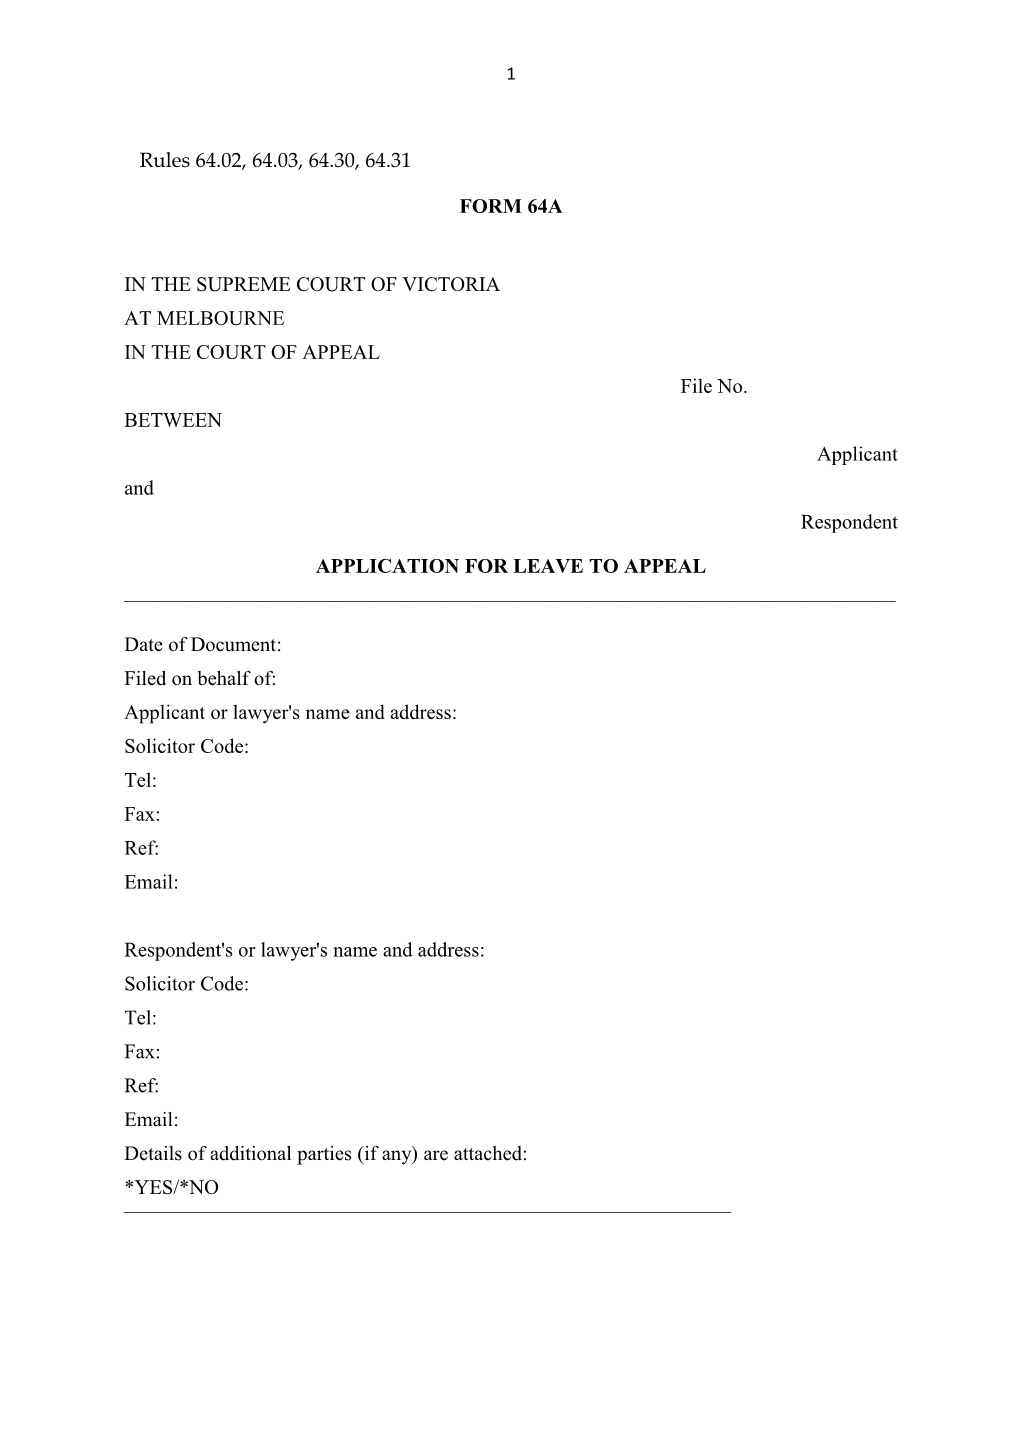 Application for Leave to Appeal